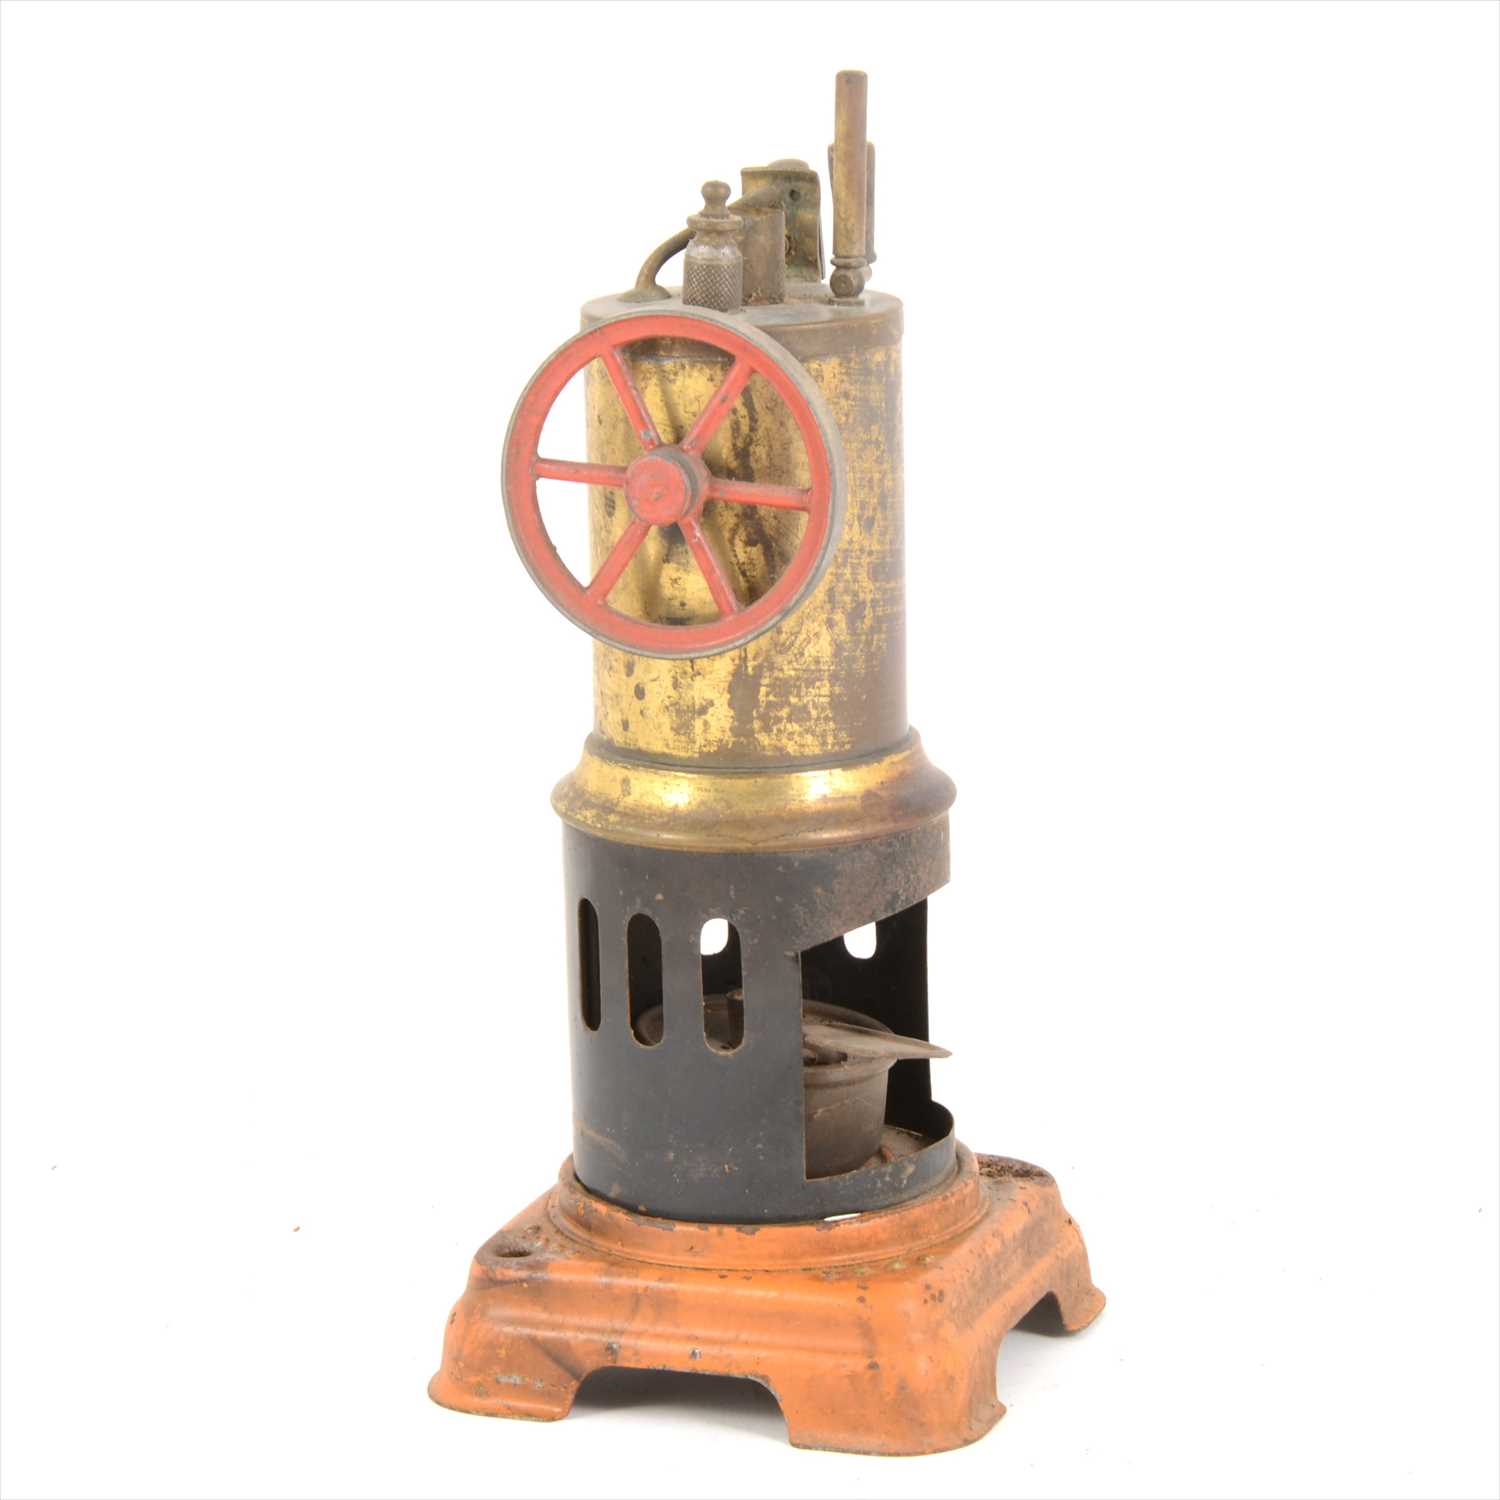 Lot 14 - A German made vertical single cylinder live steam stationary engine, with burner, (no chimney), 21cm tall.